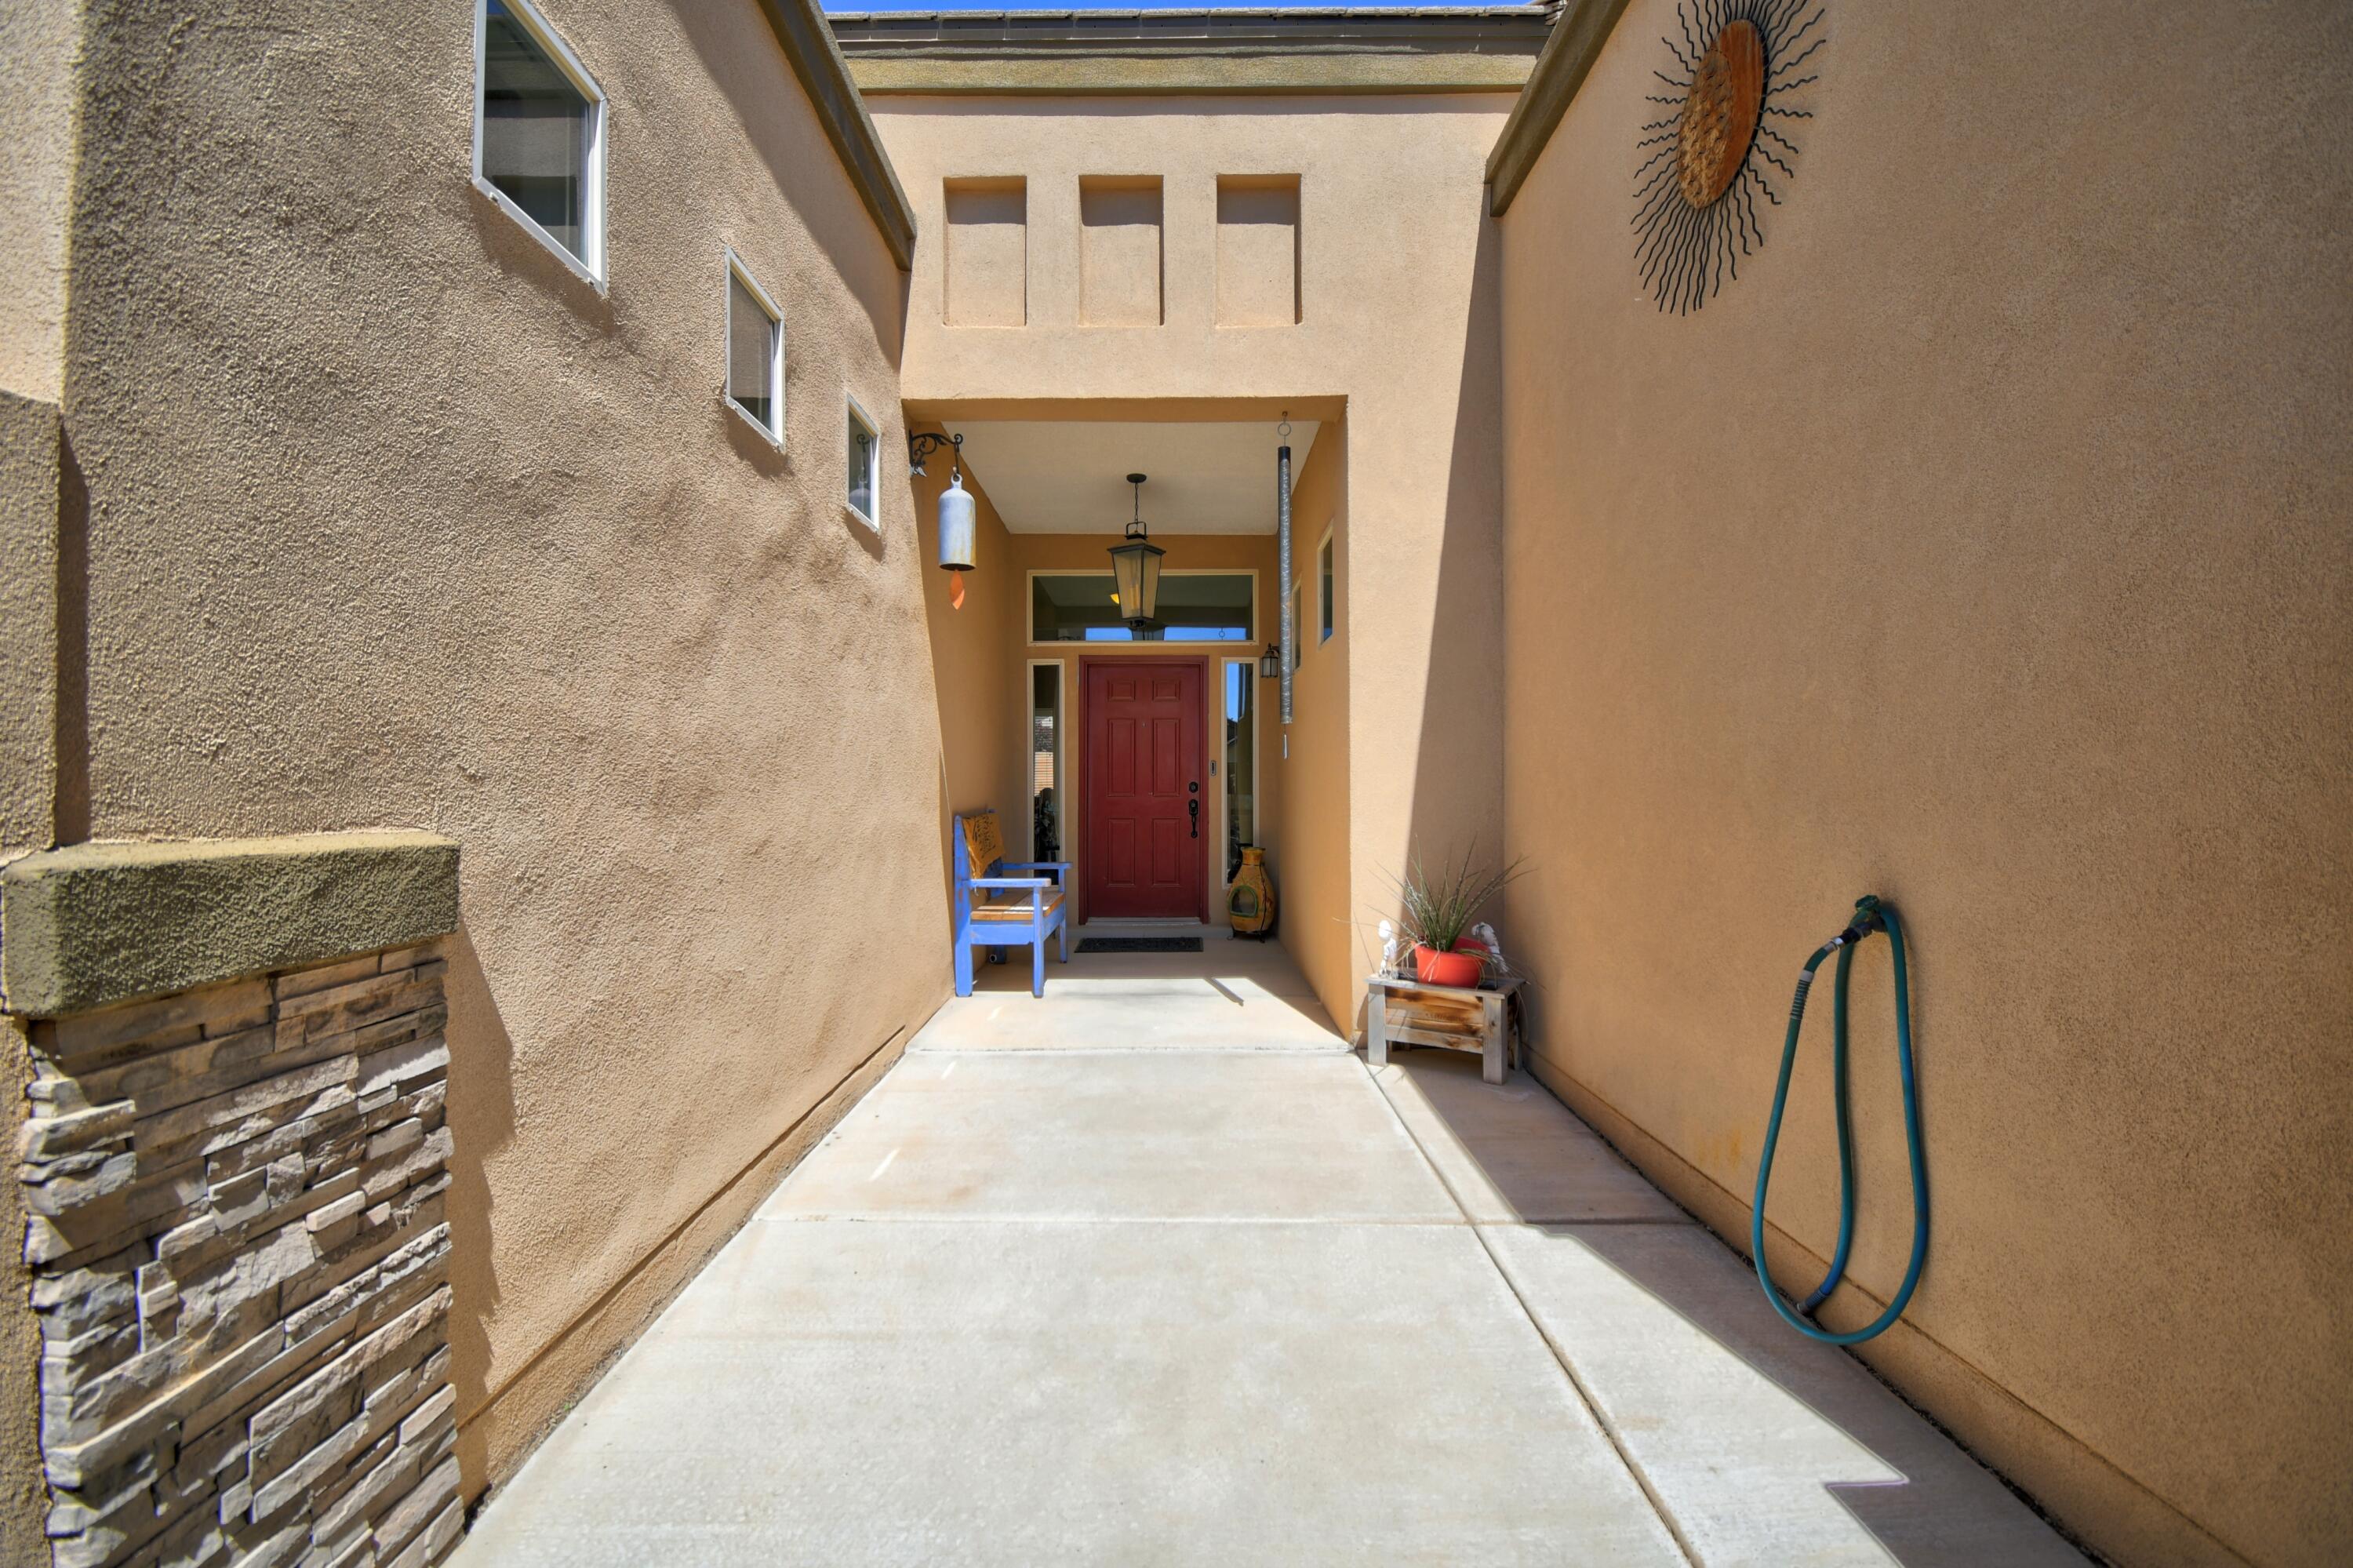 8627 Silk Tassel Road NW, Albuquerque, New Mexico 87120, 4 Bedrooms Bedrooms, ,2 BathroomsBathrooms,Residential,For Sale,8627 Silk Tassel Road NW,1060460